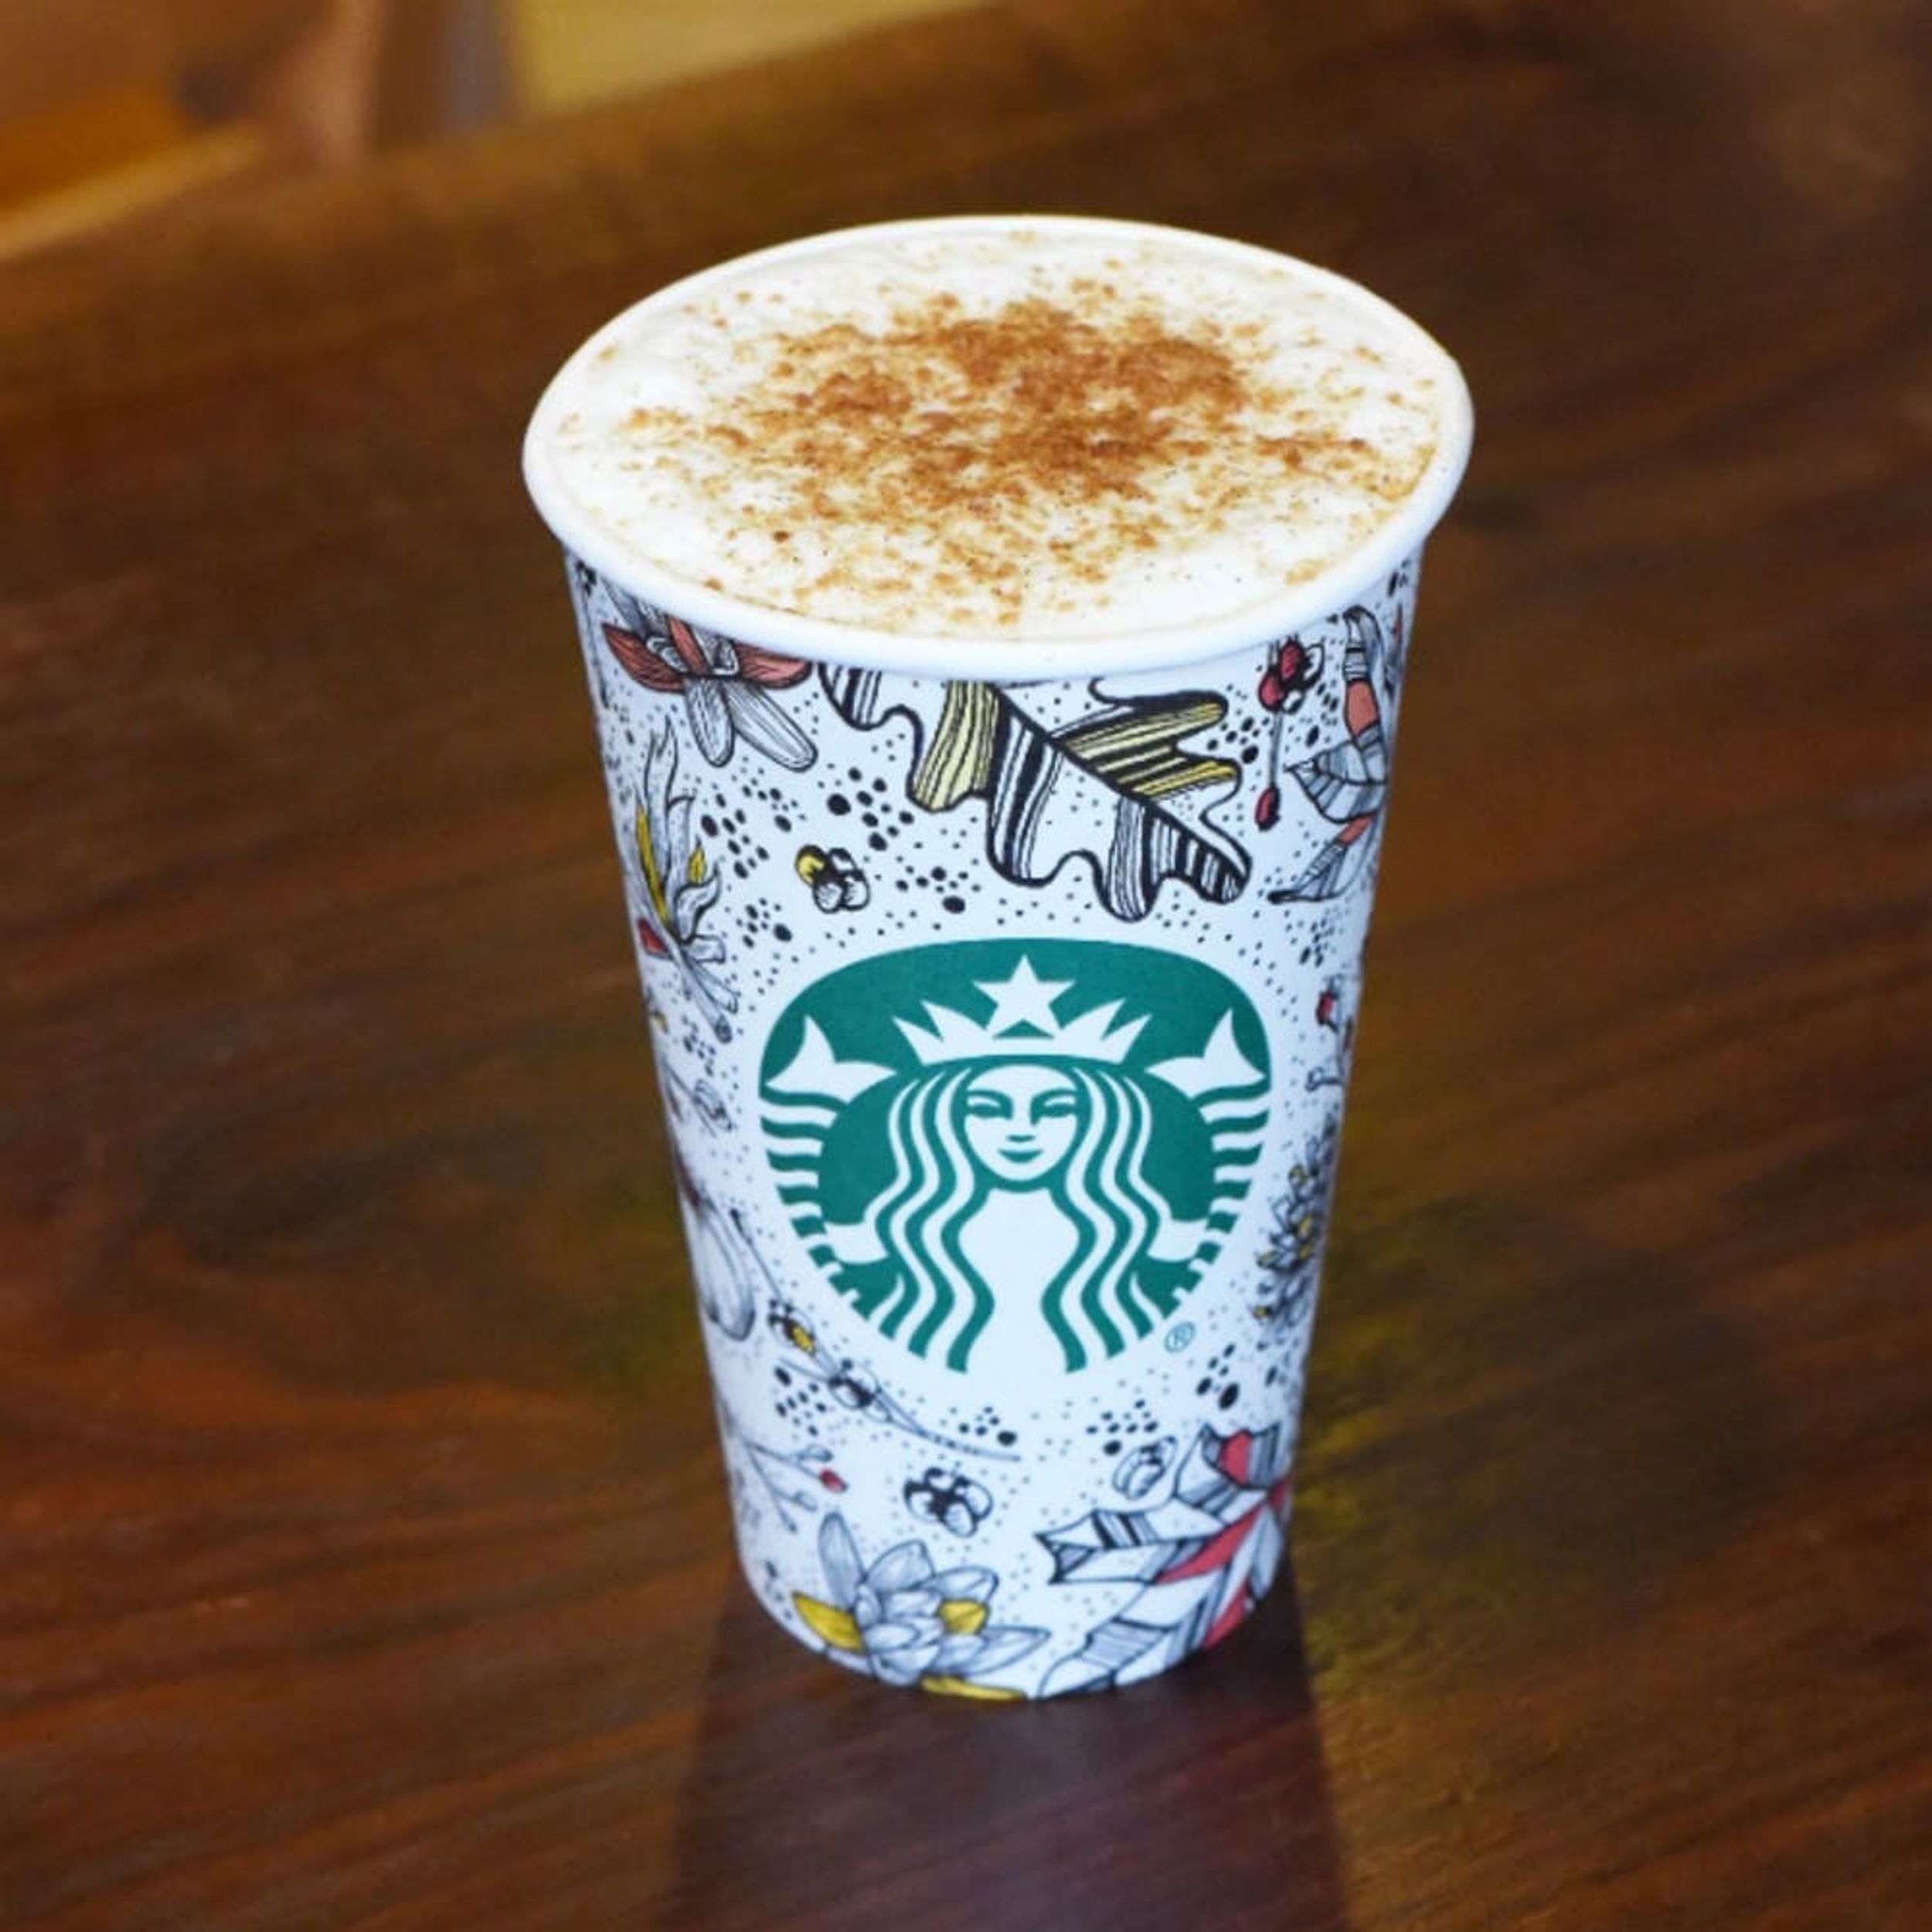 Starbucks Has a New Latte Flavor You’ll *Fall* For